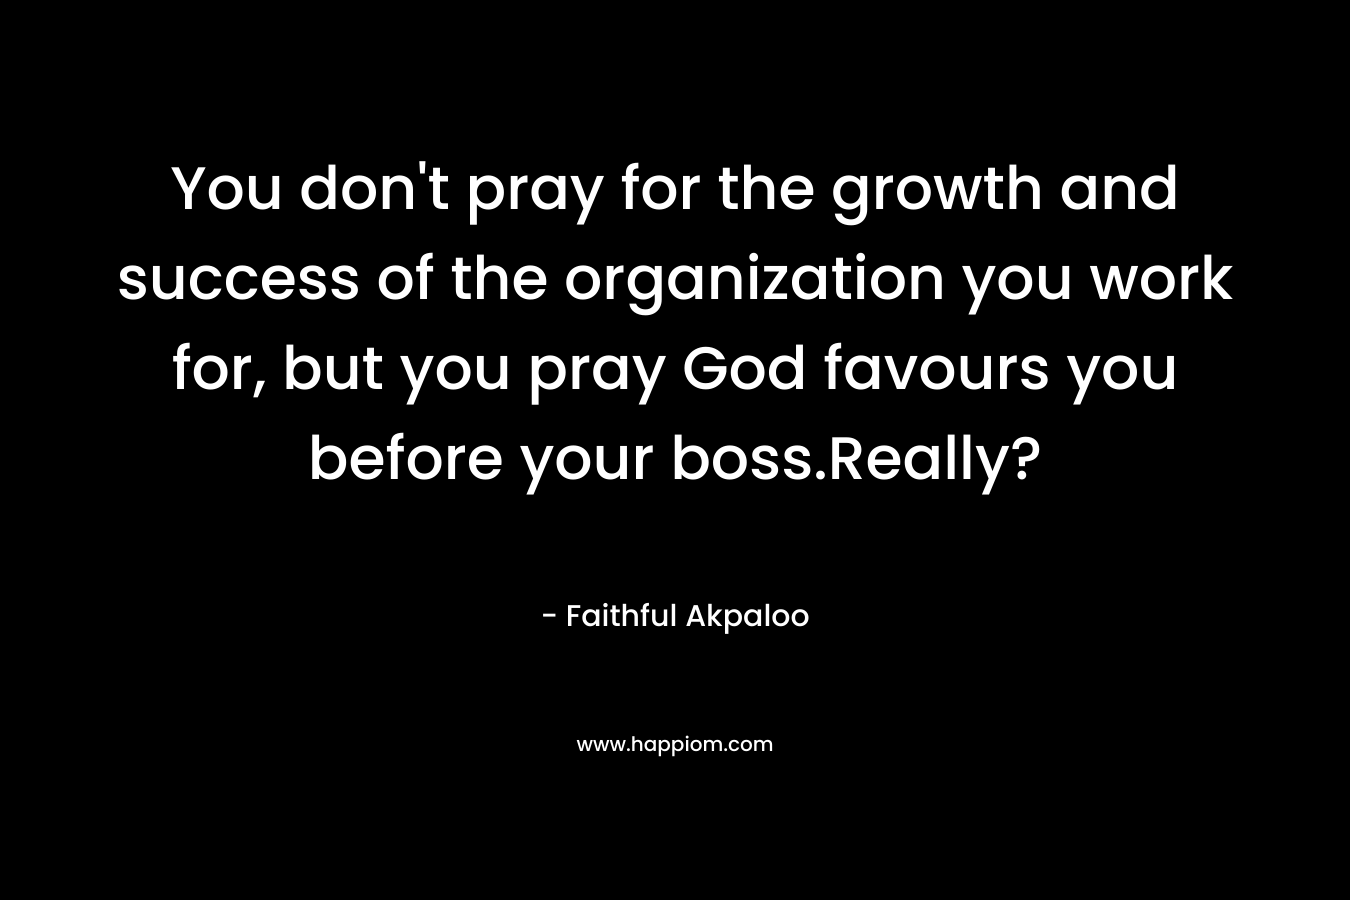 You don’t pray for the growth and success of the organization you work for, but you pray God favours you before your boss.Really? – Faithful Akpaloo